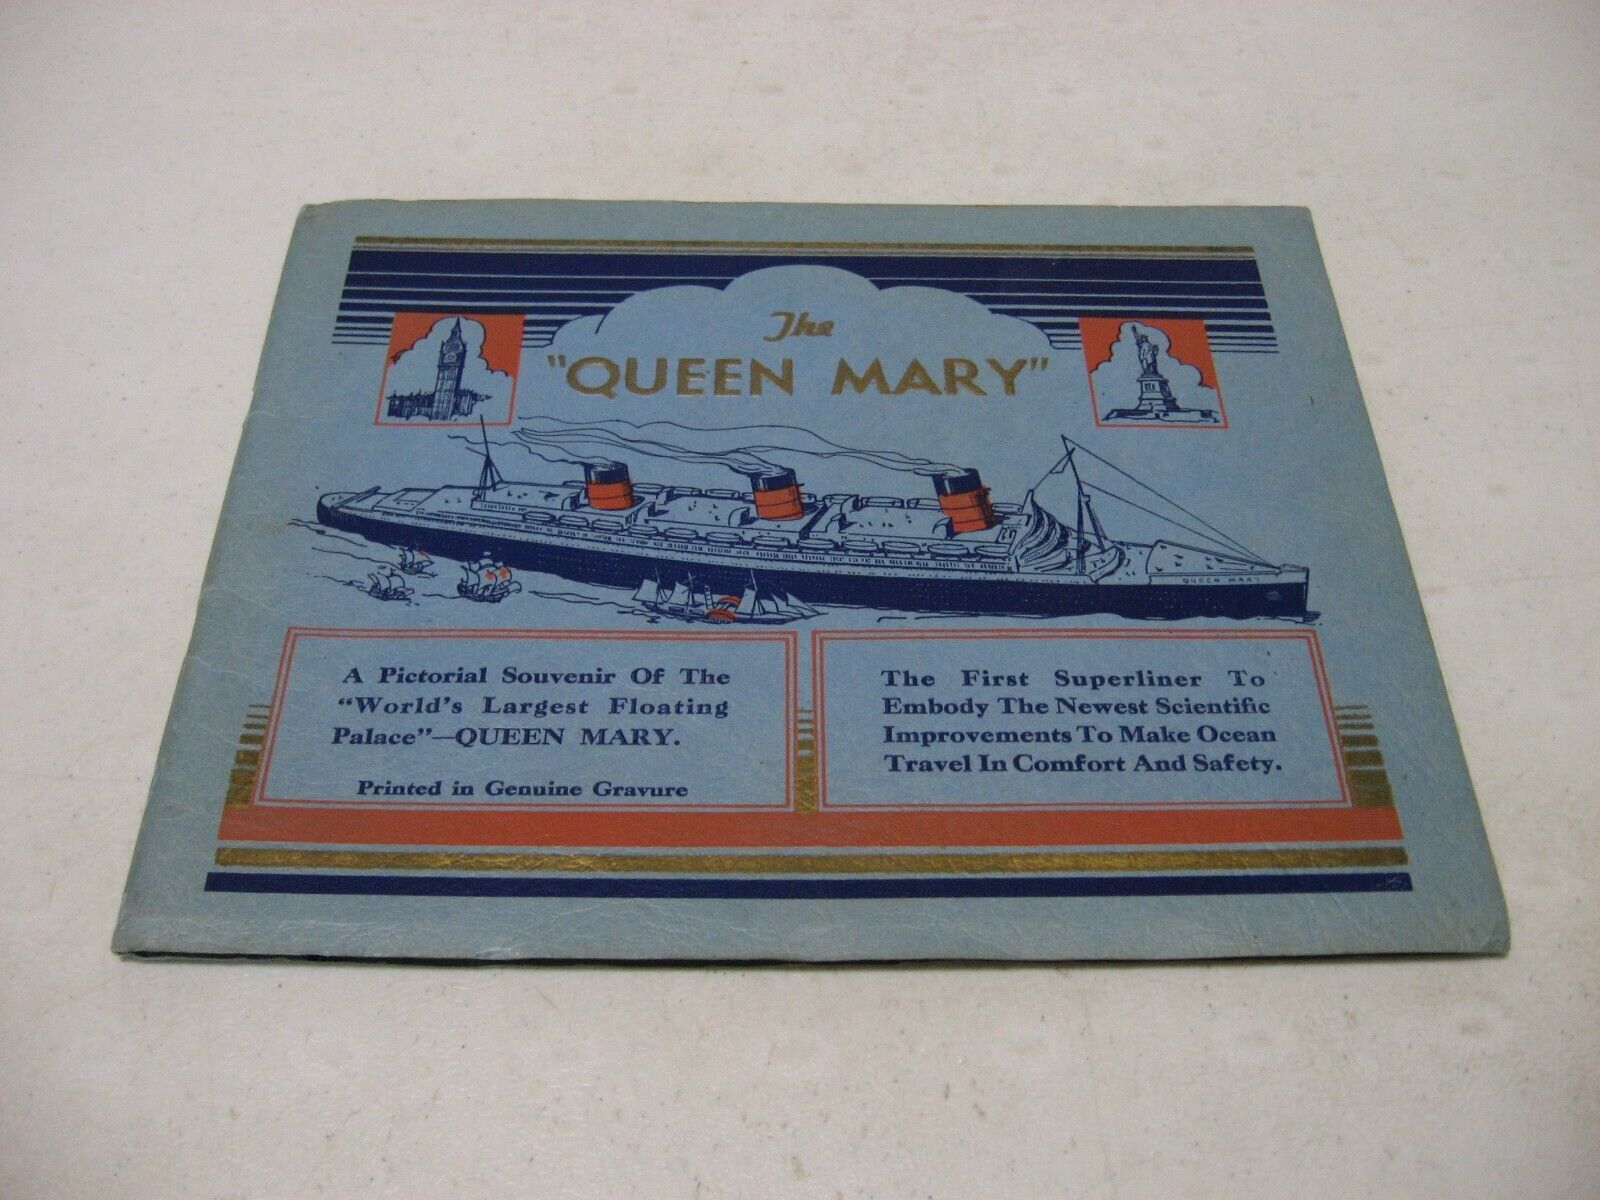 1936 The Queen Mary A Pictorial Souvenir Of The World\'s Largest Floating Palace